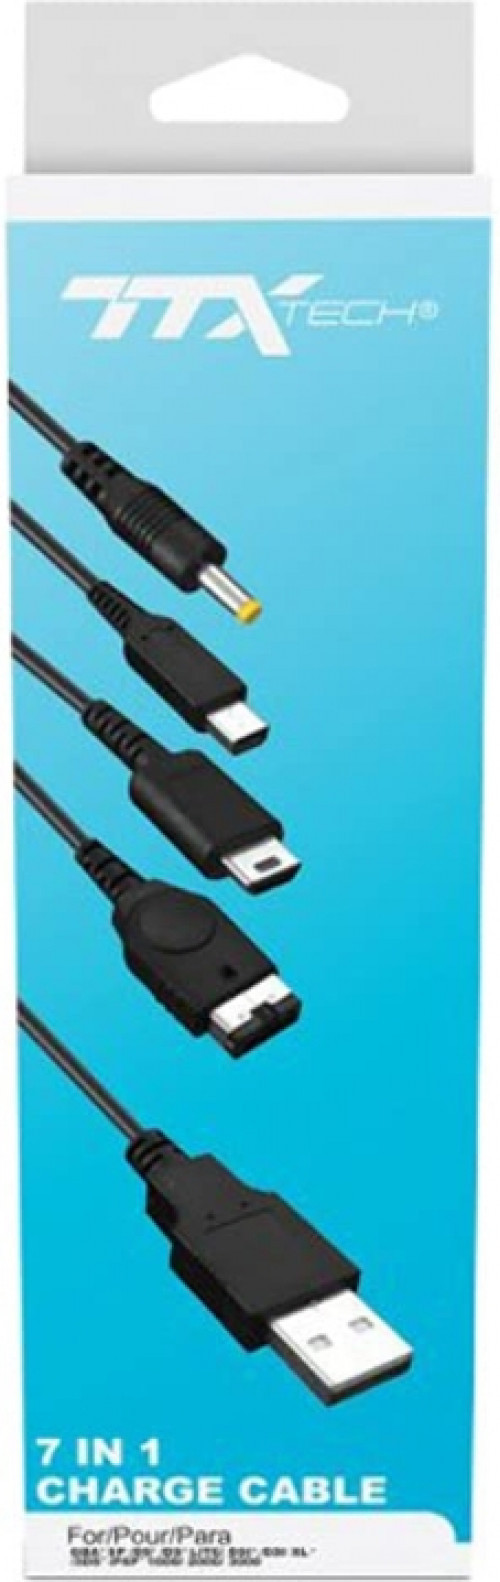 7 in 1 USB Charge Cable (TTX Tech)